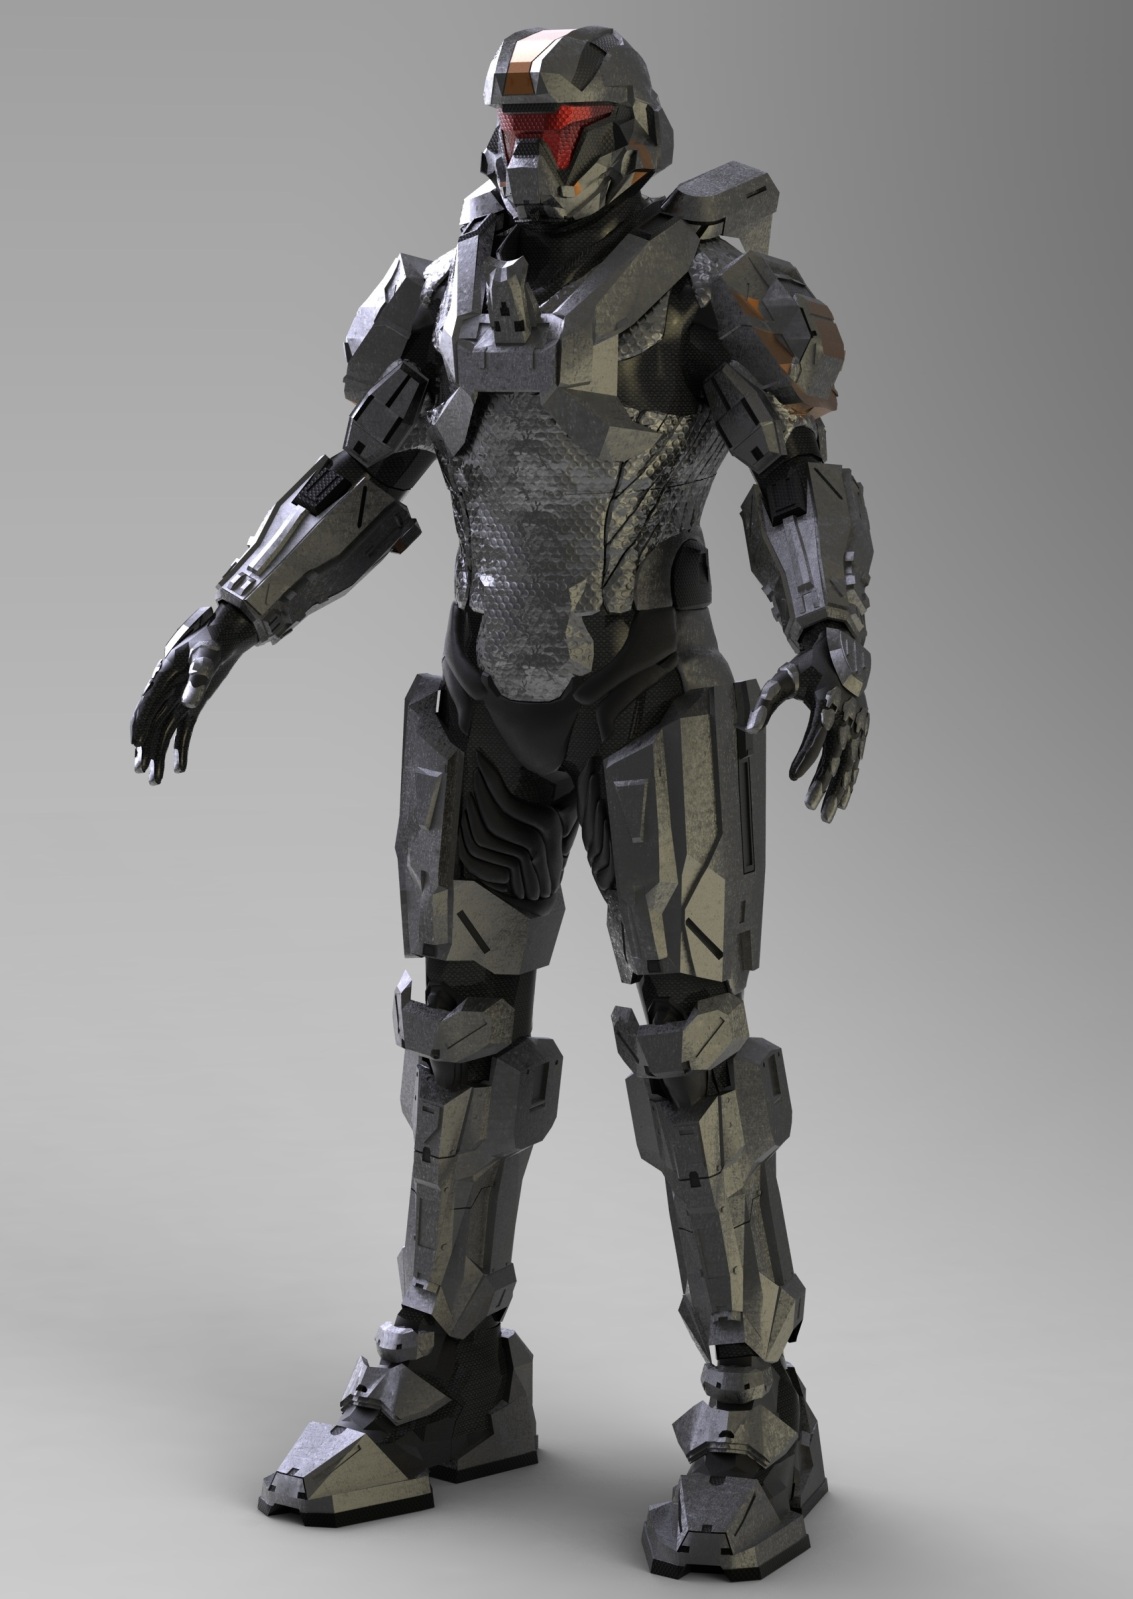 Halo 4 Recruit armor (3D Model build) | Halo Costume and Prop Maker ...